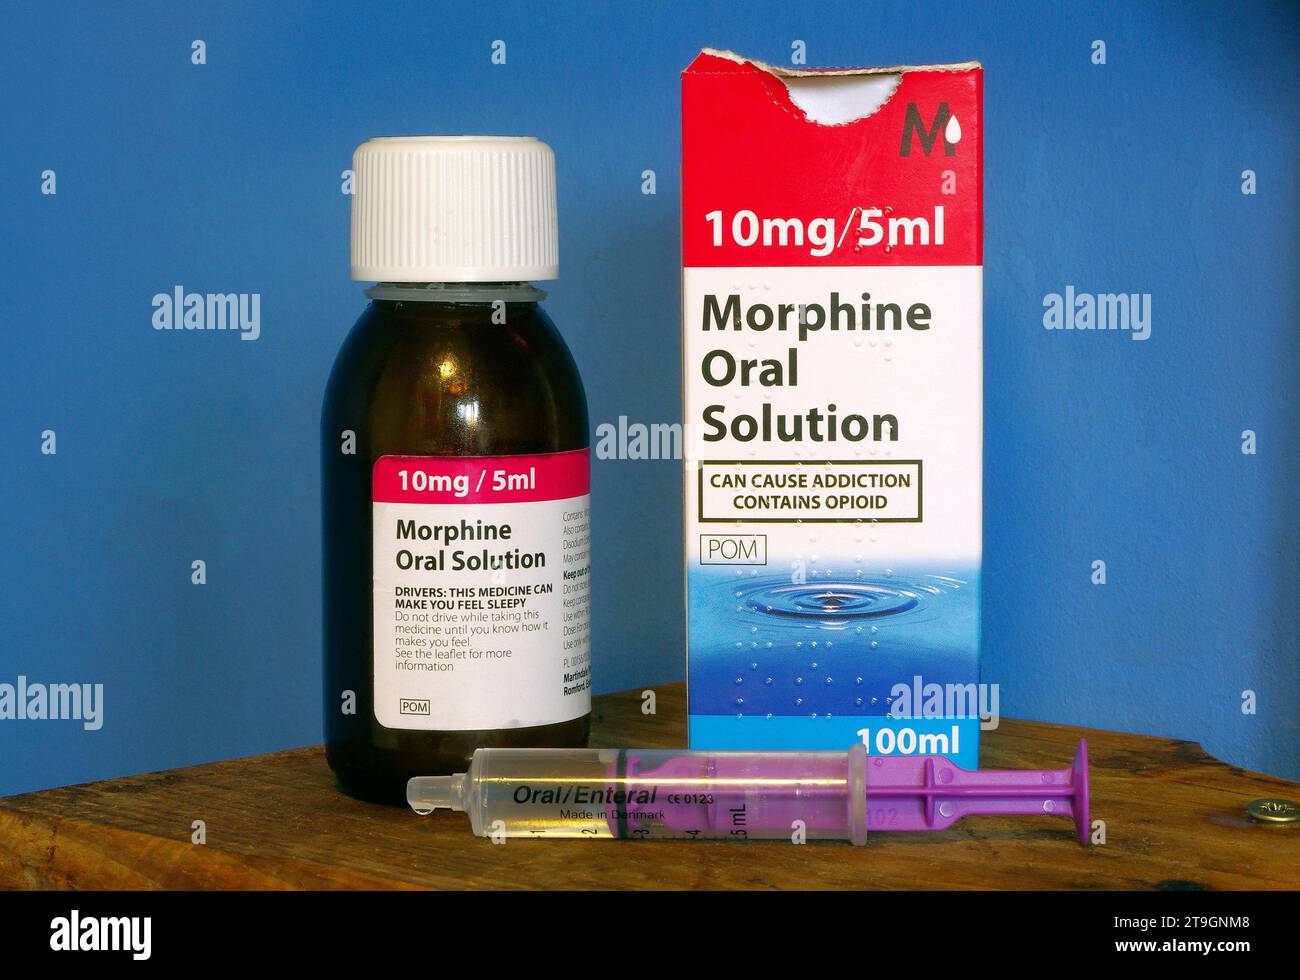 MORPHINE SOLUTION BUVABLE 10mg/5ml Banque D'Images